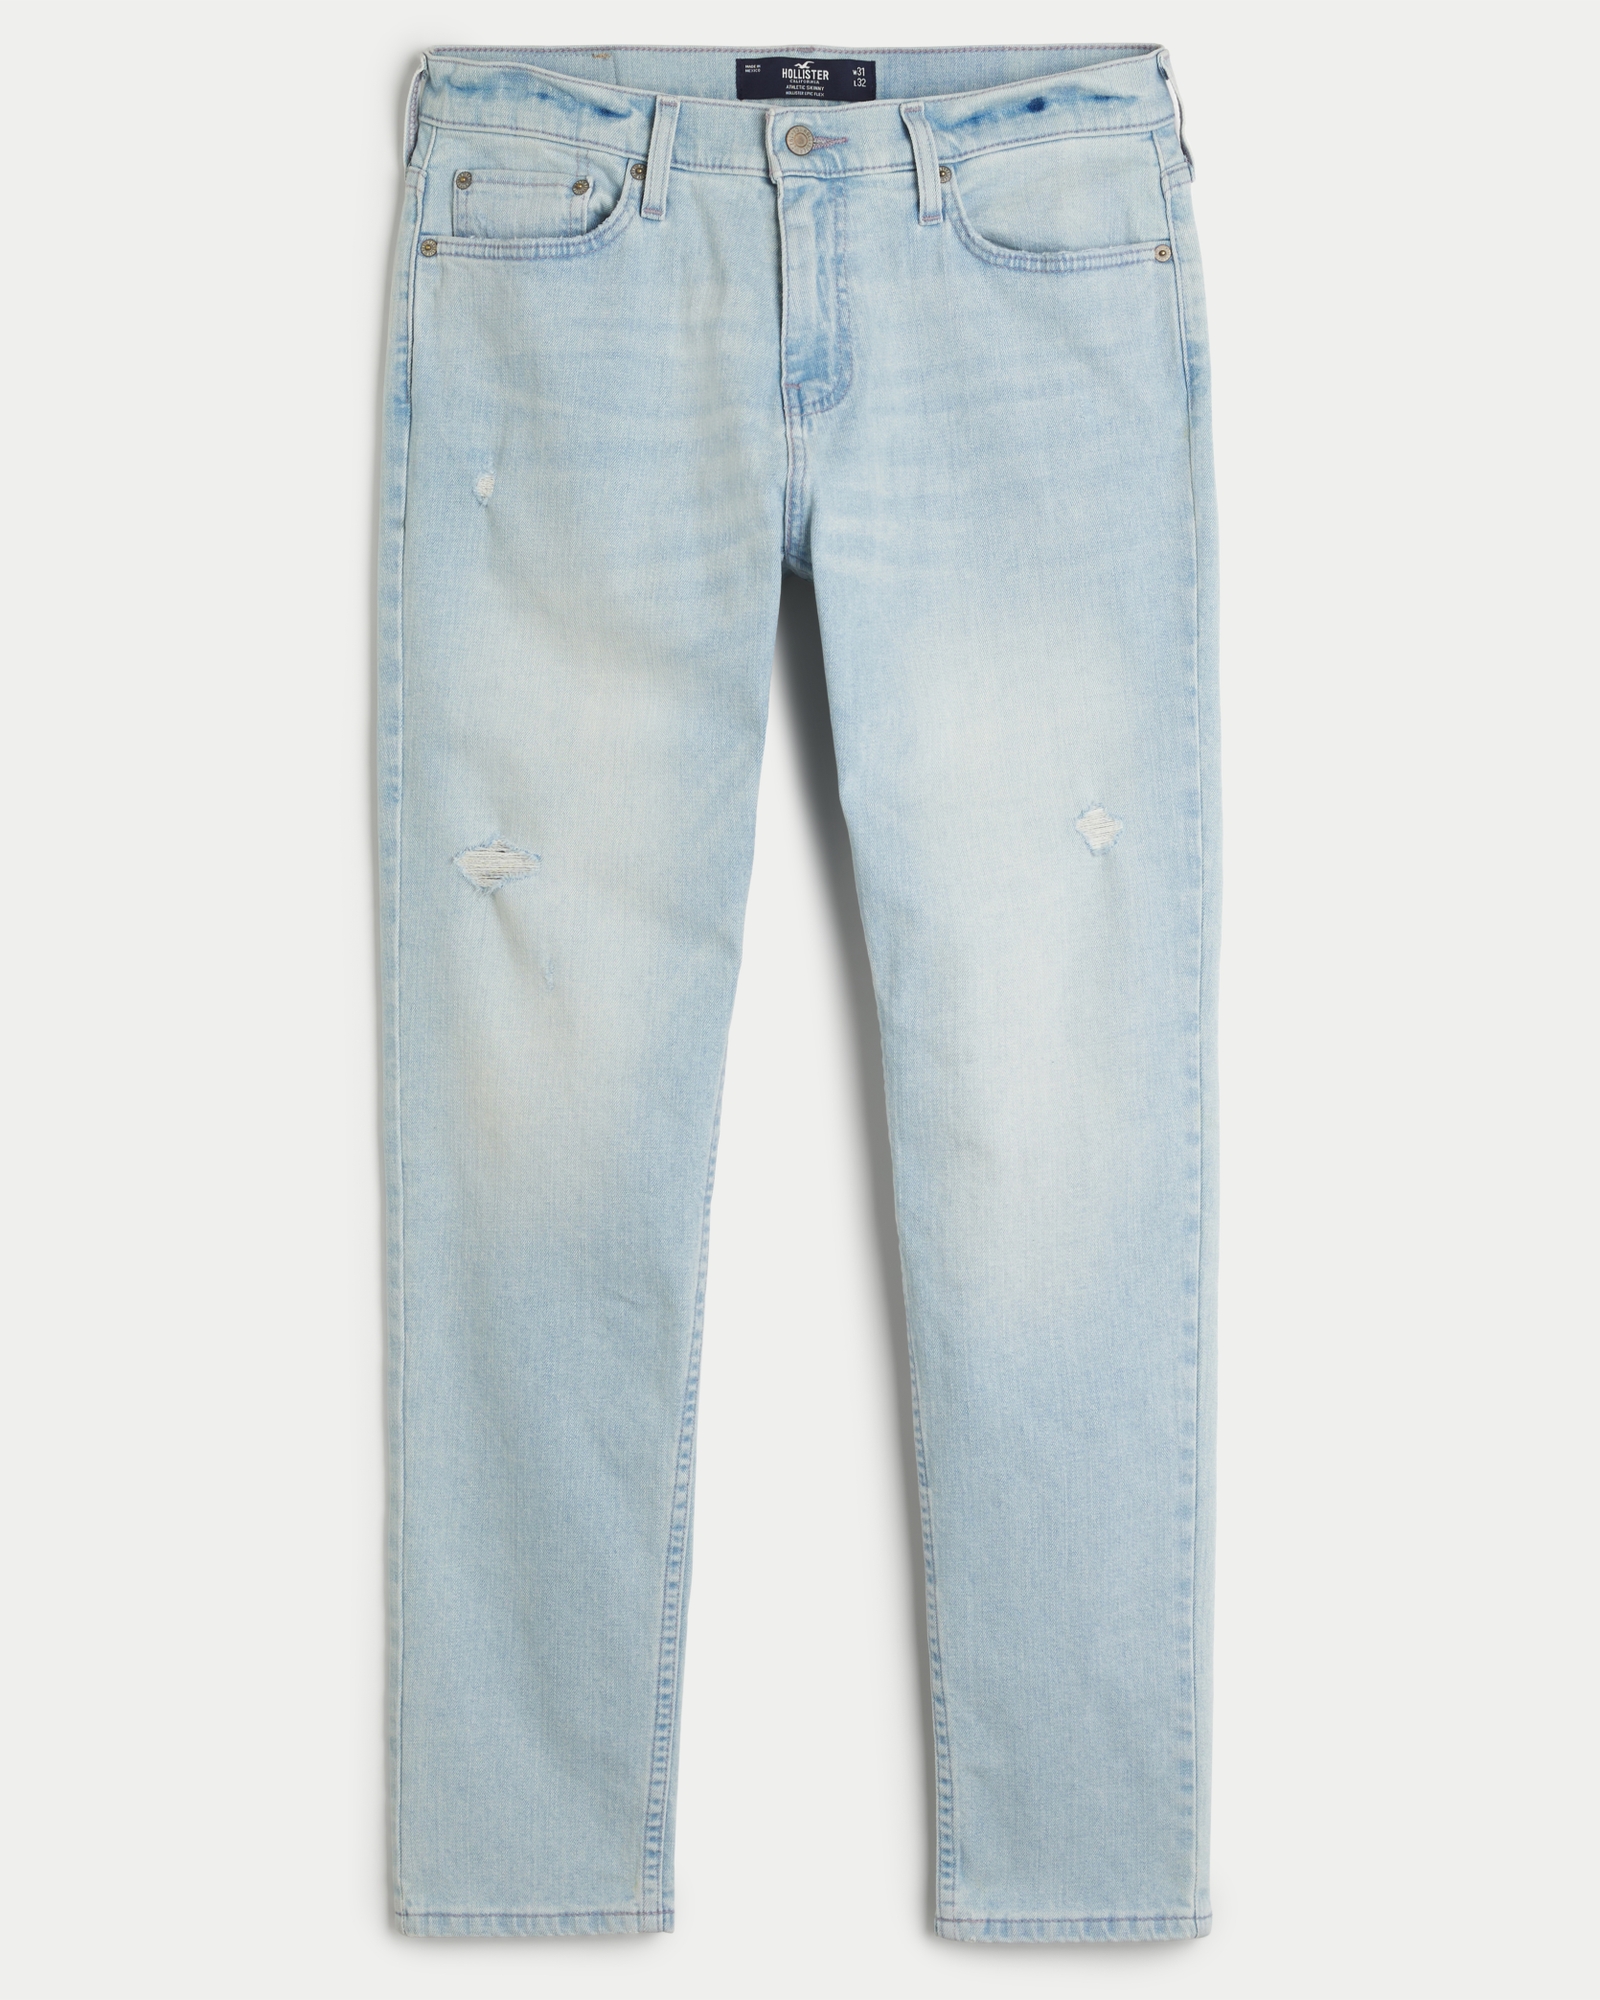 https://img.hollisterco.com/is/image/anf/KIC_331-2509-2841-281_prod1.jpg?policy=product-extra-large